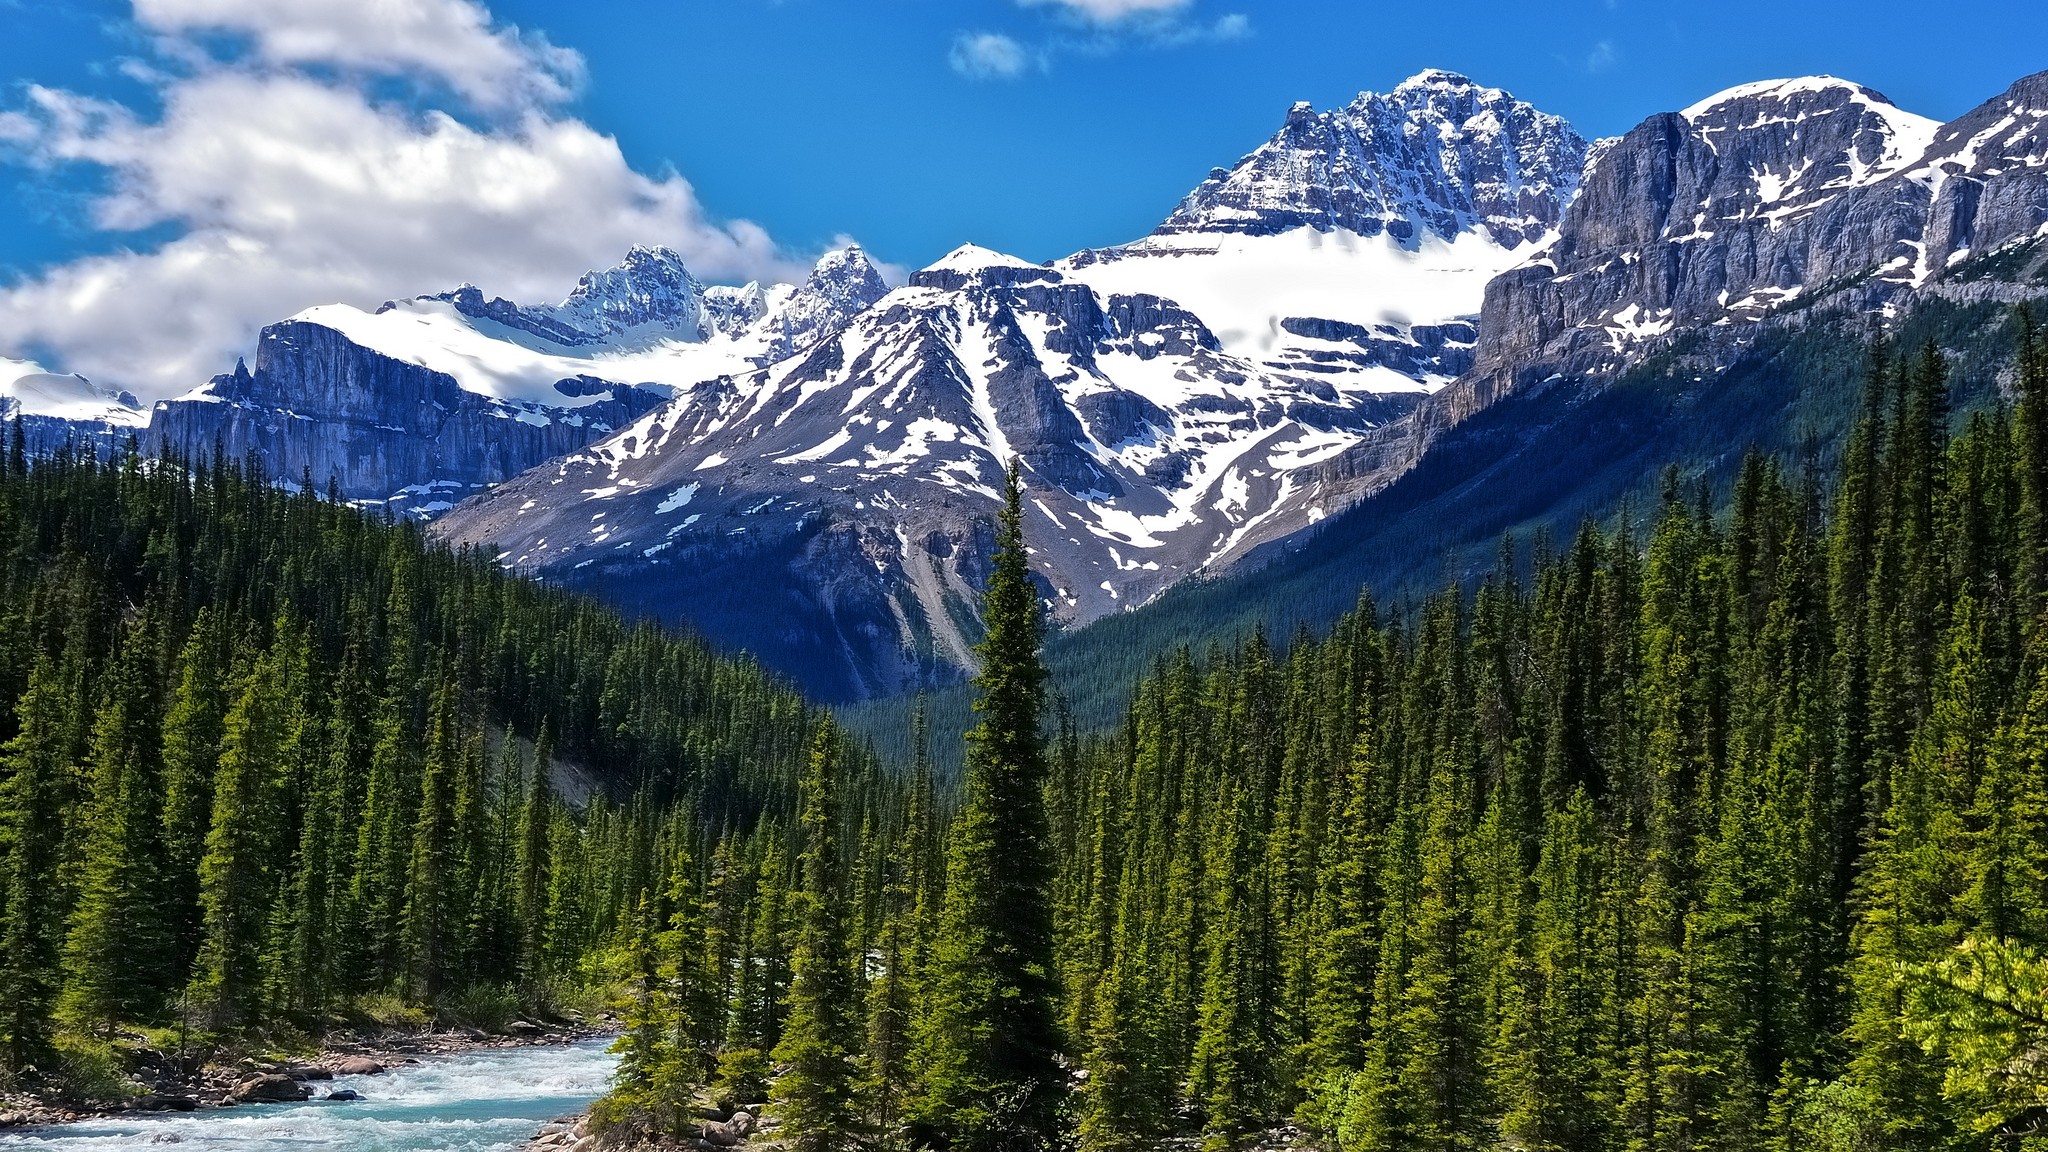 Mountains Clouds Landscapes Nature Snow Trees White Forests Canada